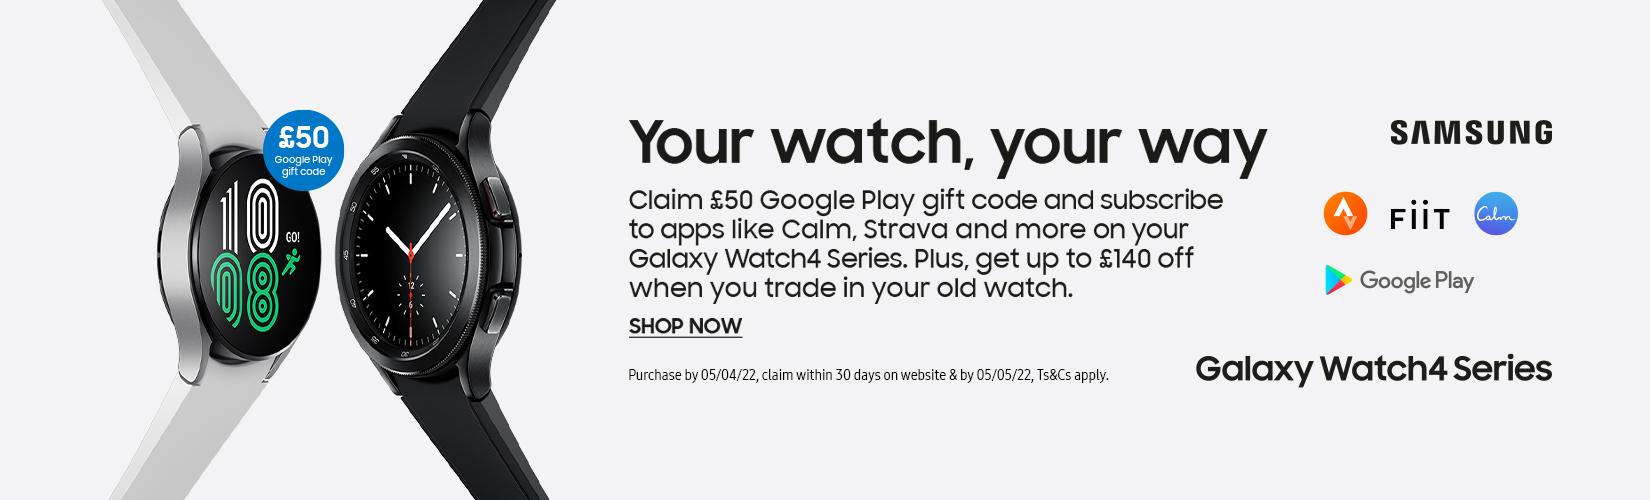 Your watch, your way. Claim £50 Google play gift code and subscribe to apps like calm, strava and more on your Galaxy watch4 series. Plus, get up to £140 off when you trade in your old watch. Shop now. Purchase by 05/04/22, claim within 30 days on website & 05/05/2022, Ts&Cs apply.